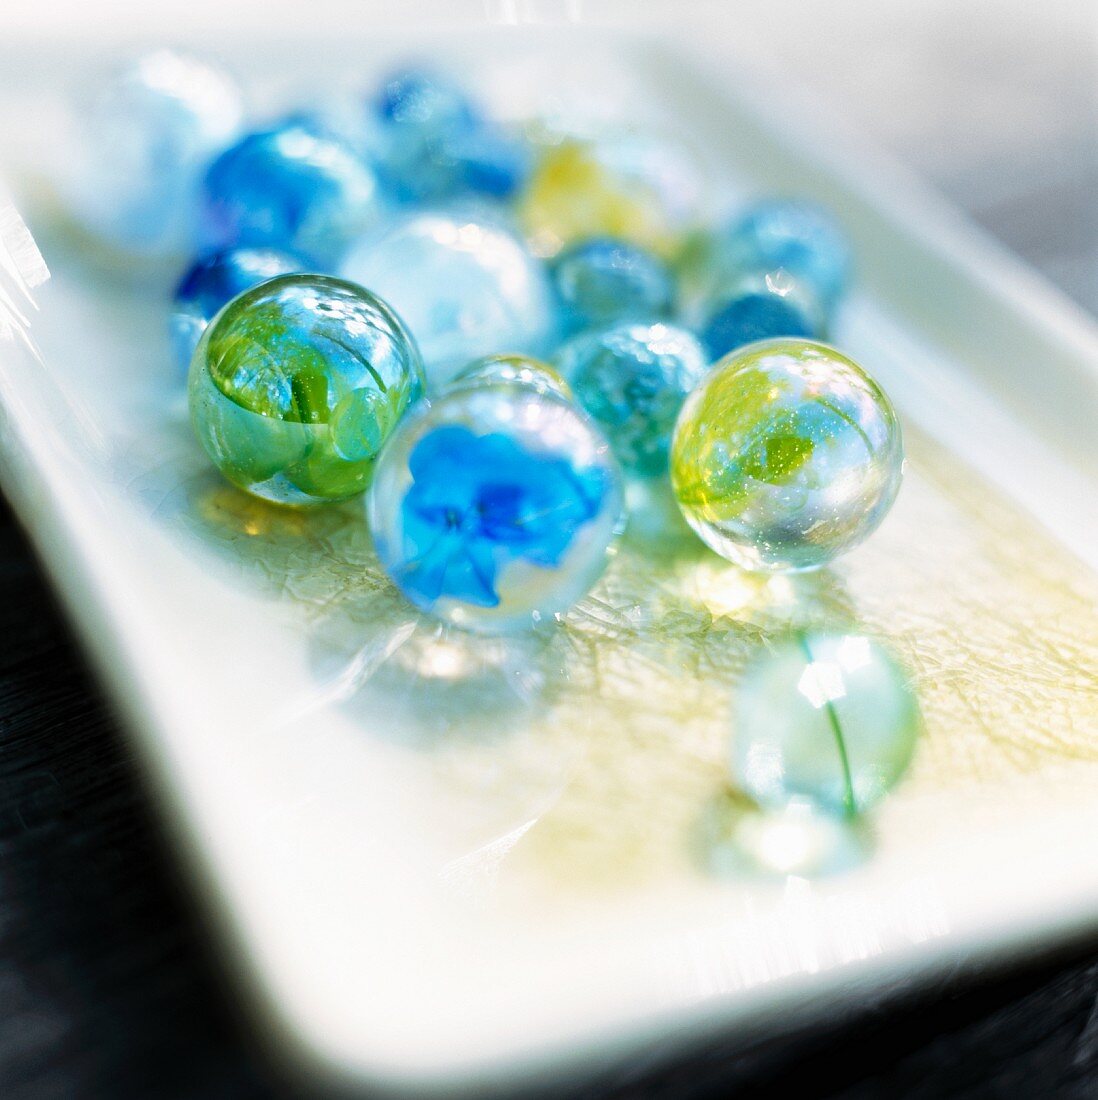 Colourful glass marbles on a tray